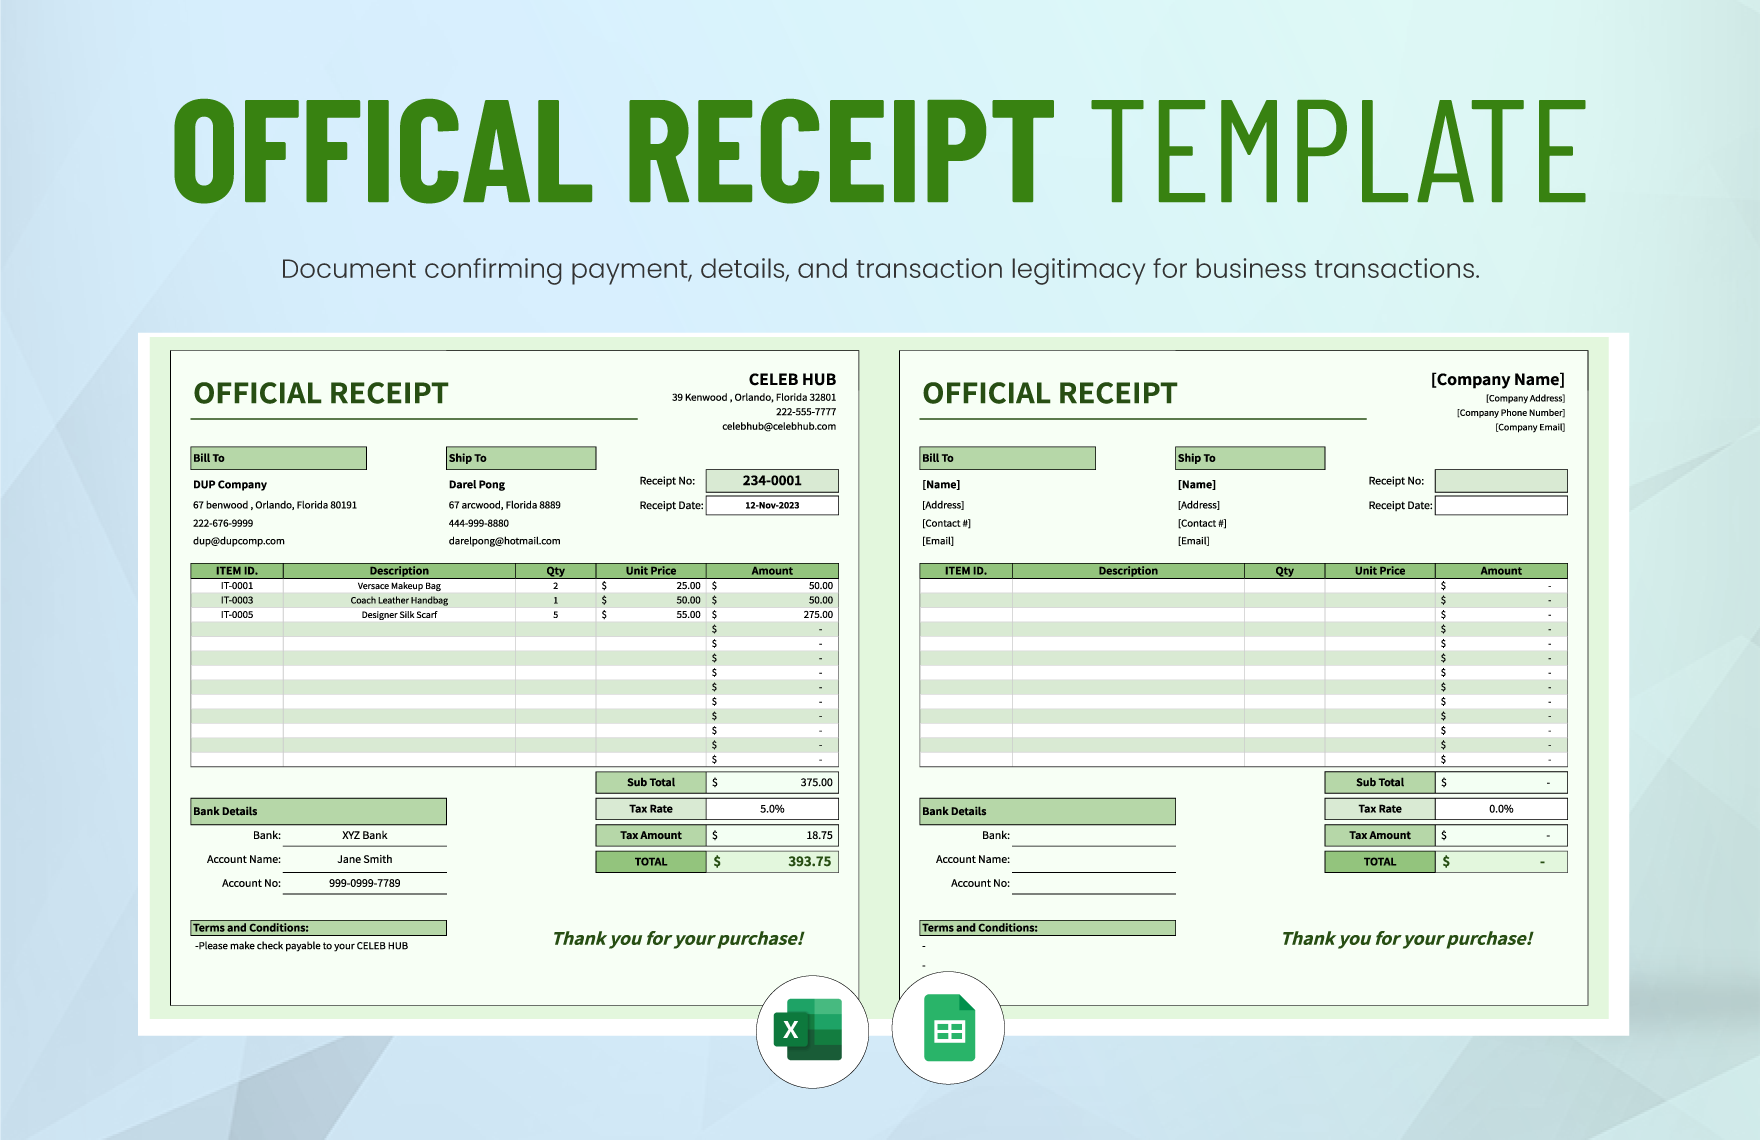 Offical Receipt Template in Excel, Google Sheets